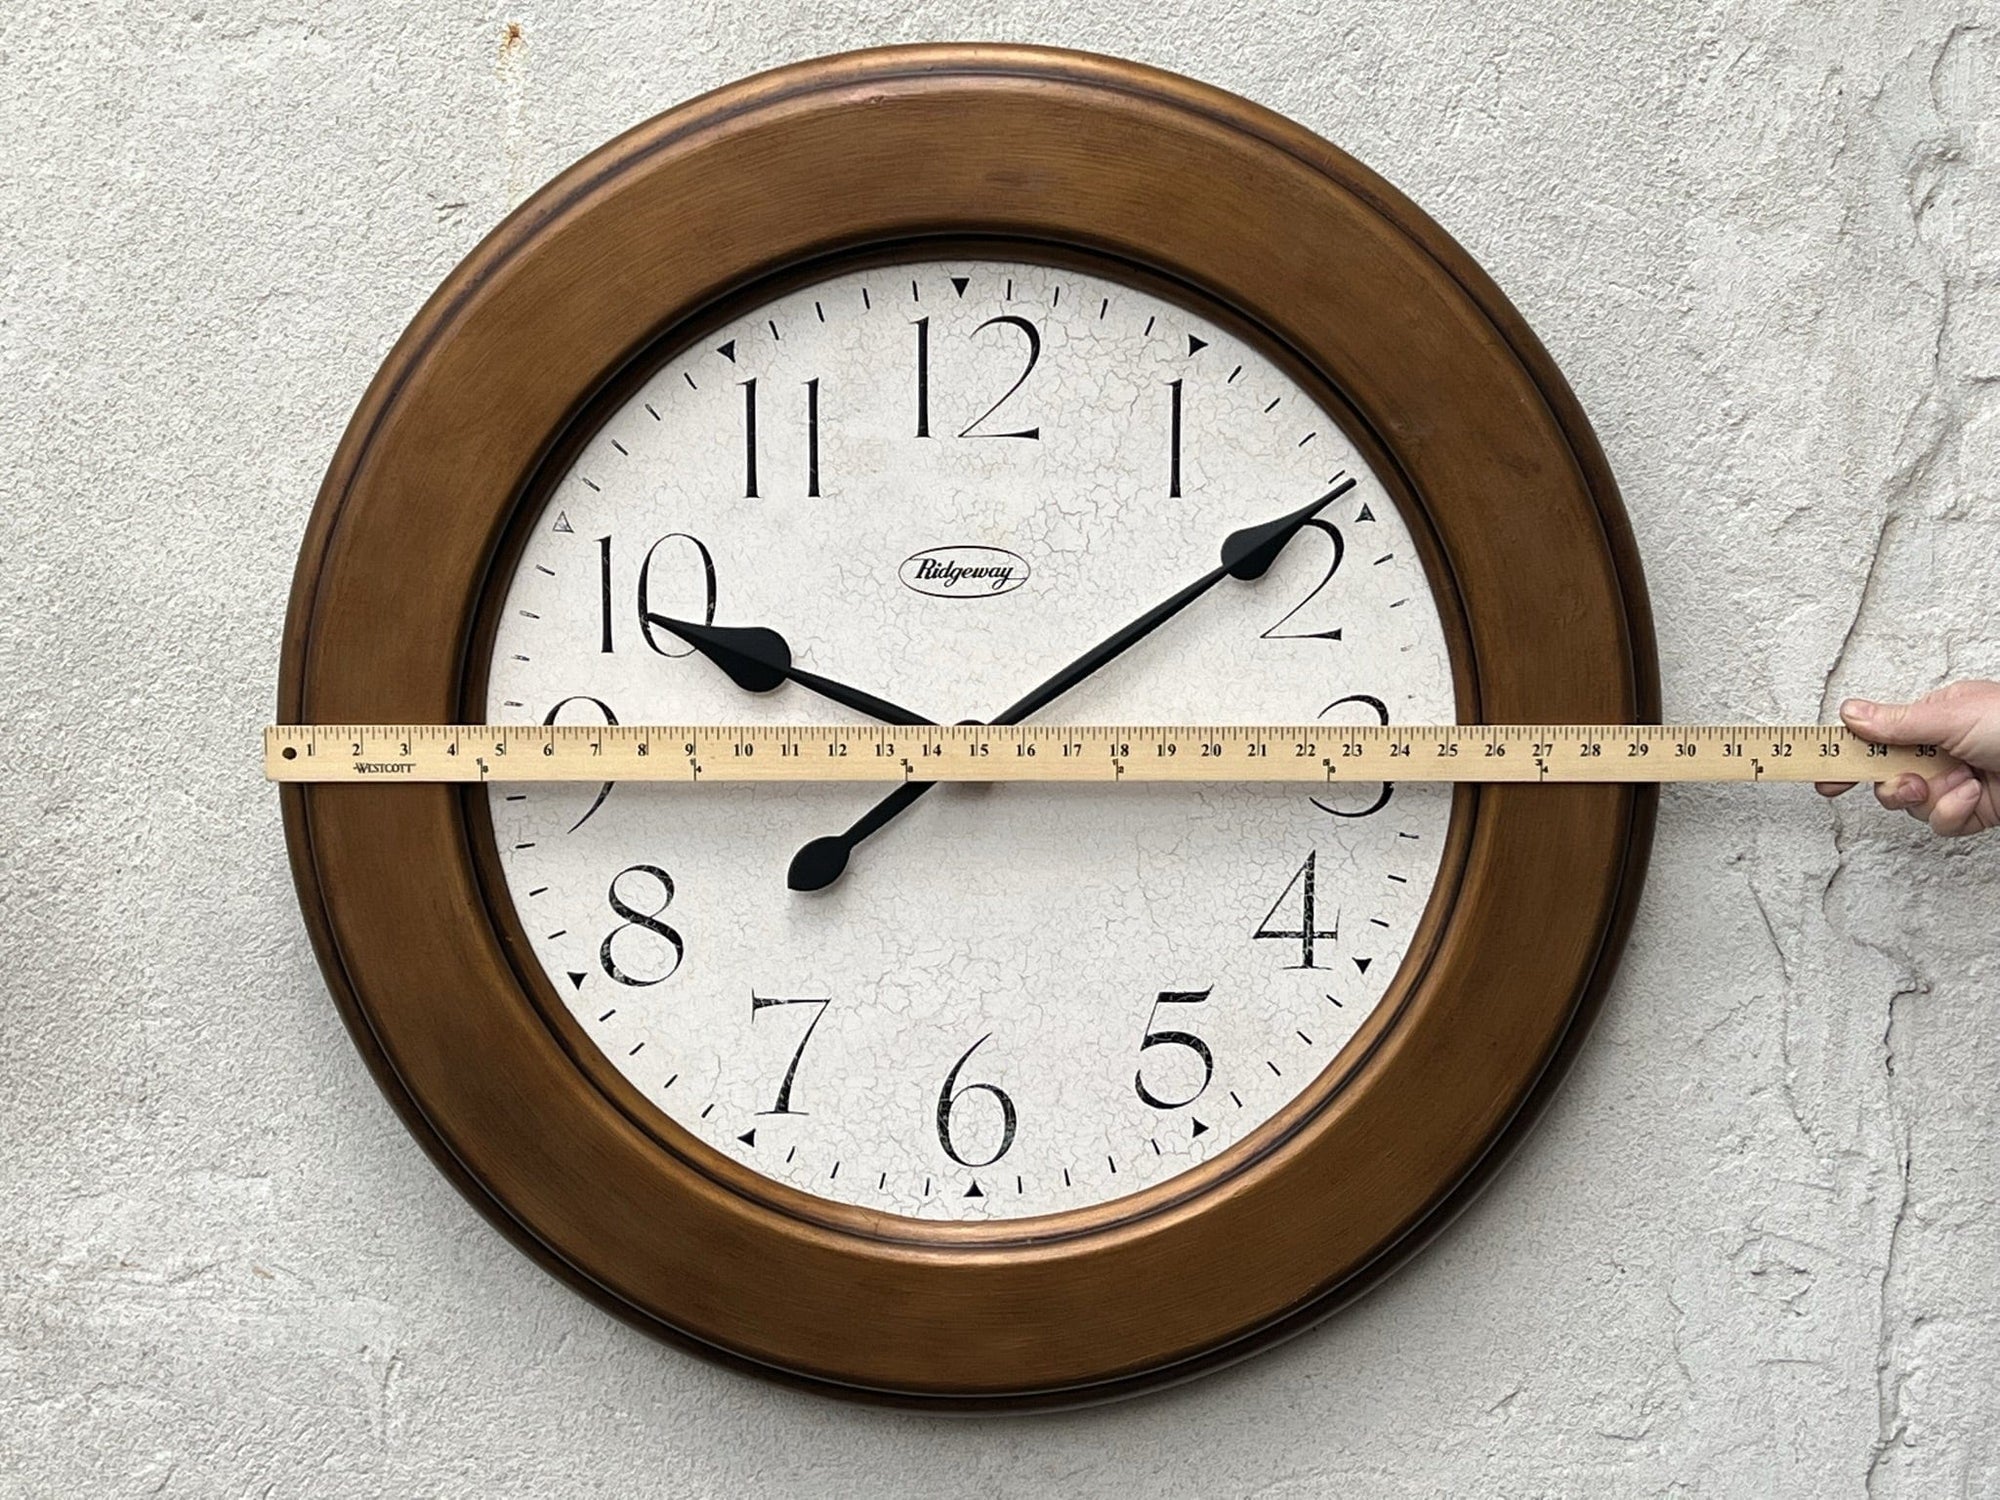 I Like Mike's Mid Century Modern Wall Clocks Oversized Round Wall Clock, Bronze and White with Crackle Finish, 29" Diameter